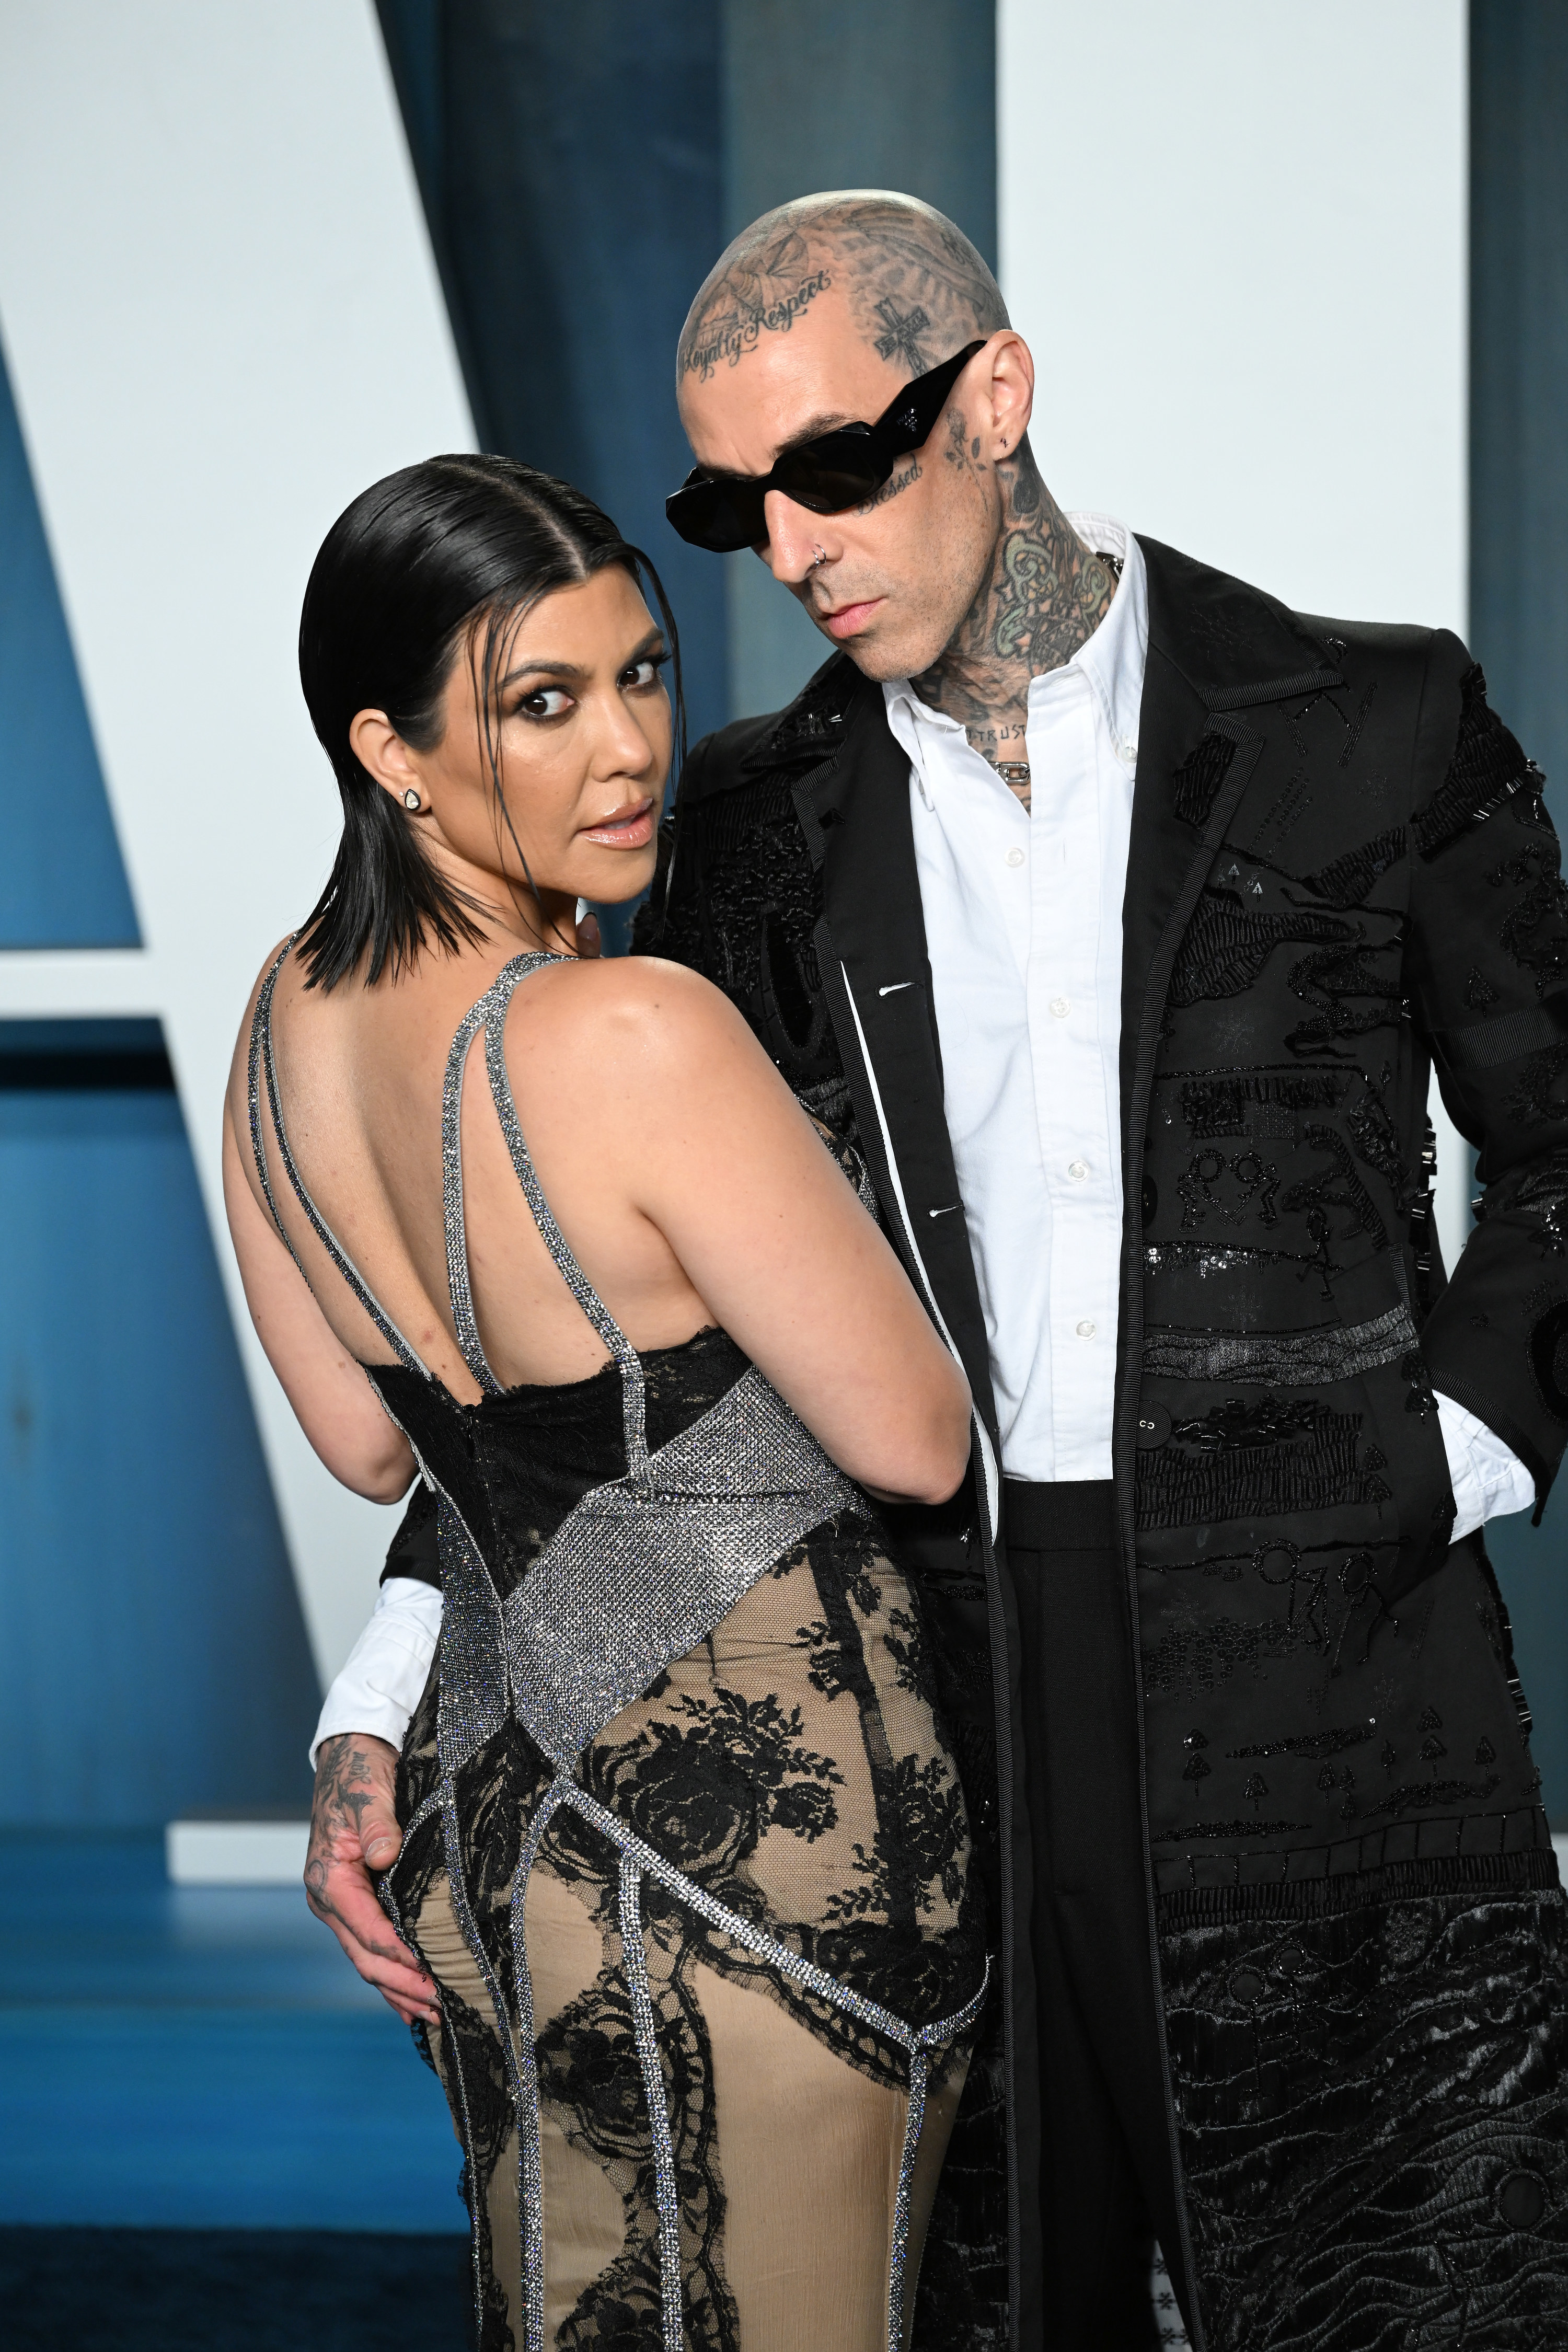 Barker + Kardashian Had Marriage Ceremony, Aren't Legally Married